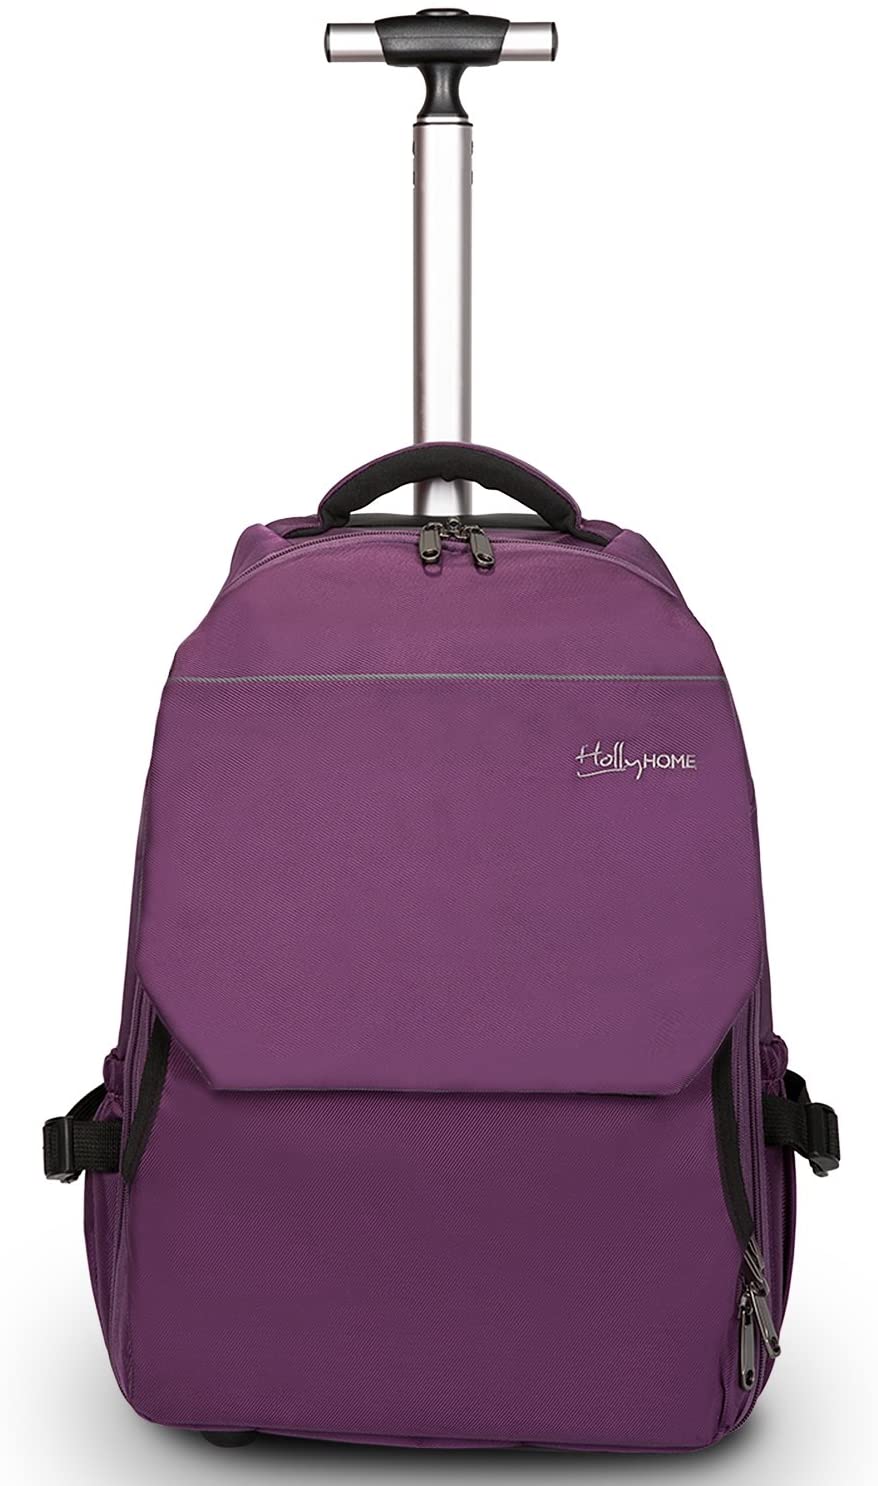 HollyHOME Laptop Wheeled Rolling Backpack